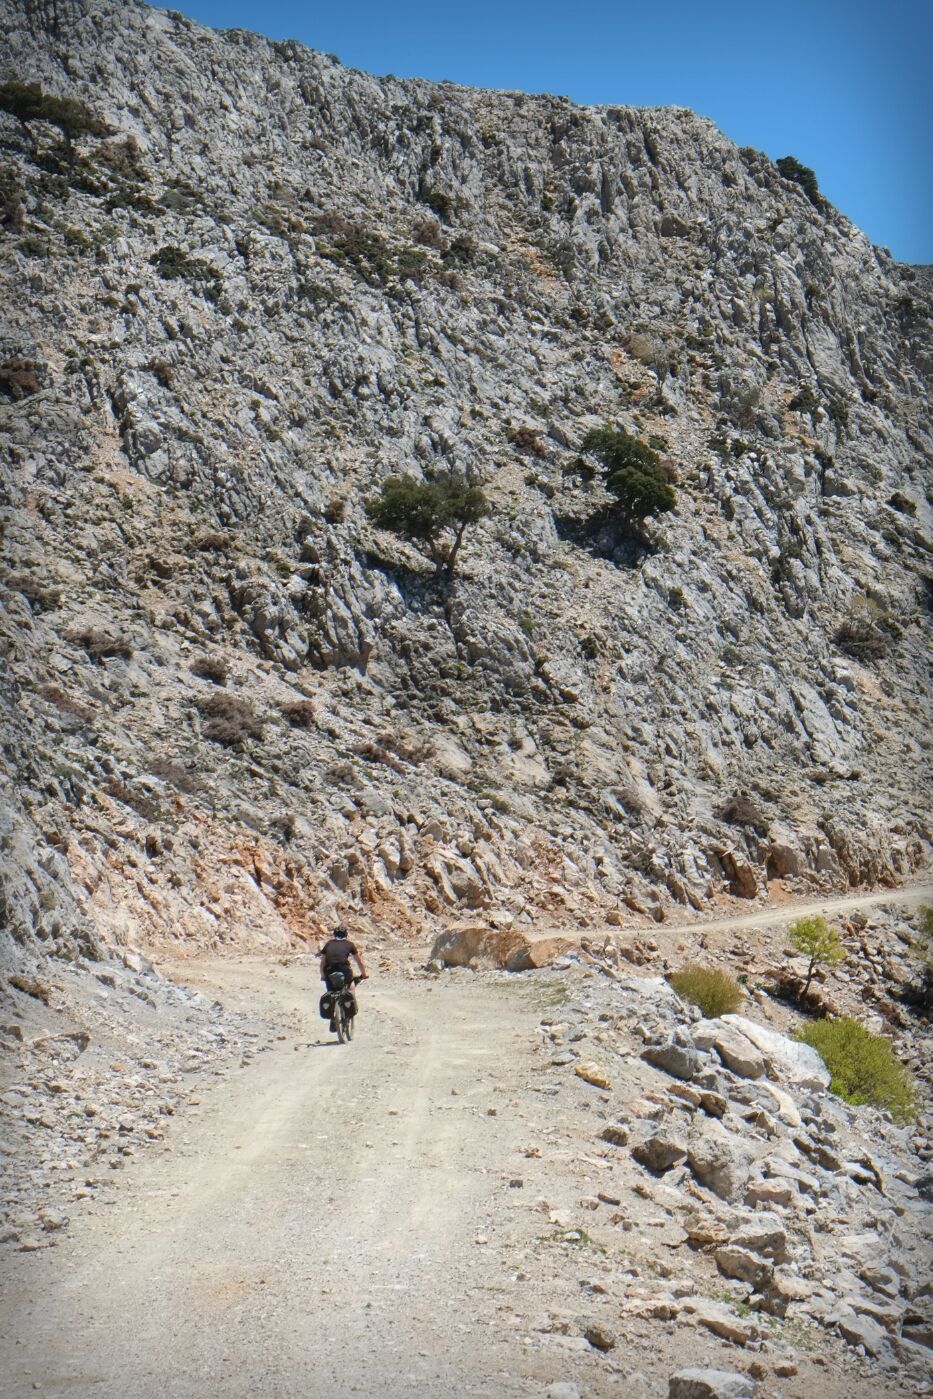 We were very quickly back on dirt however for a long, fast descent along the southern flanks of the range..